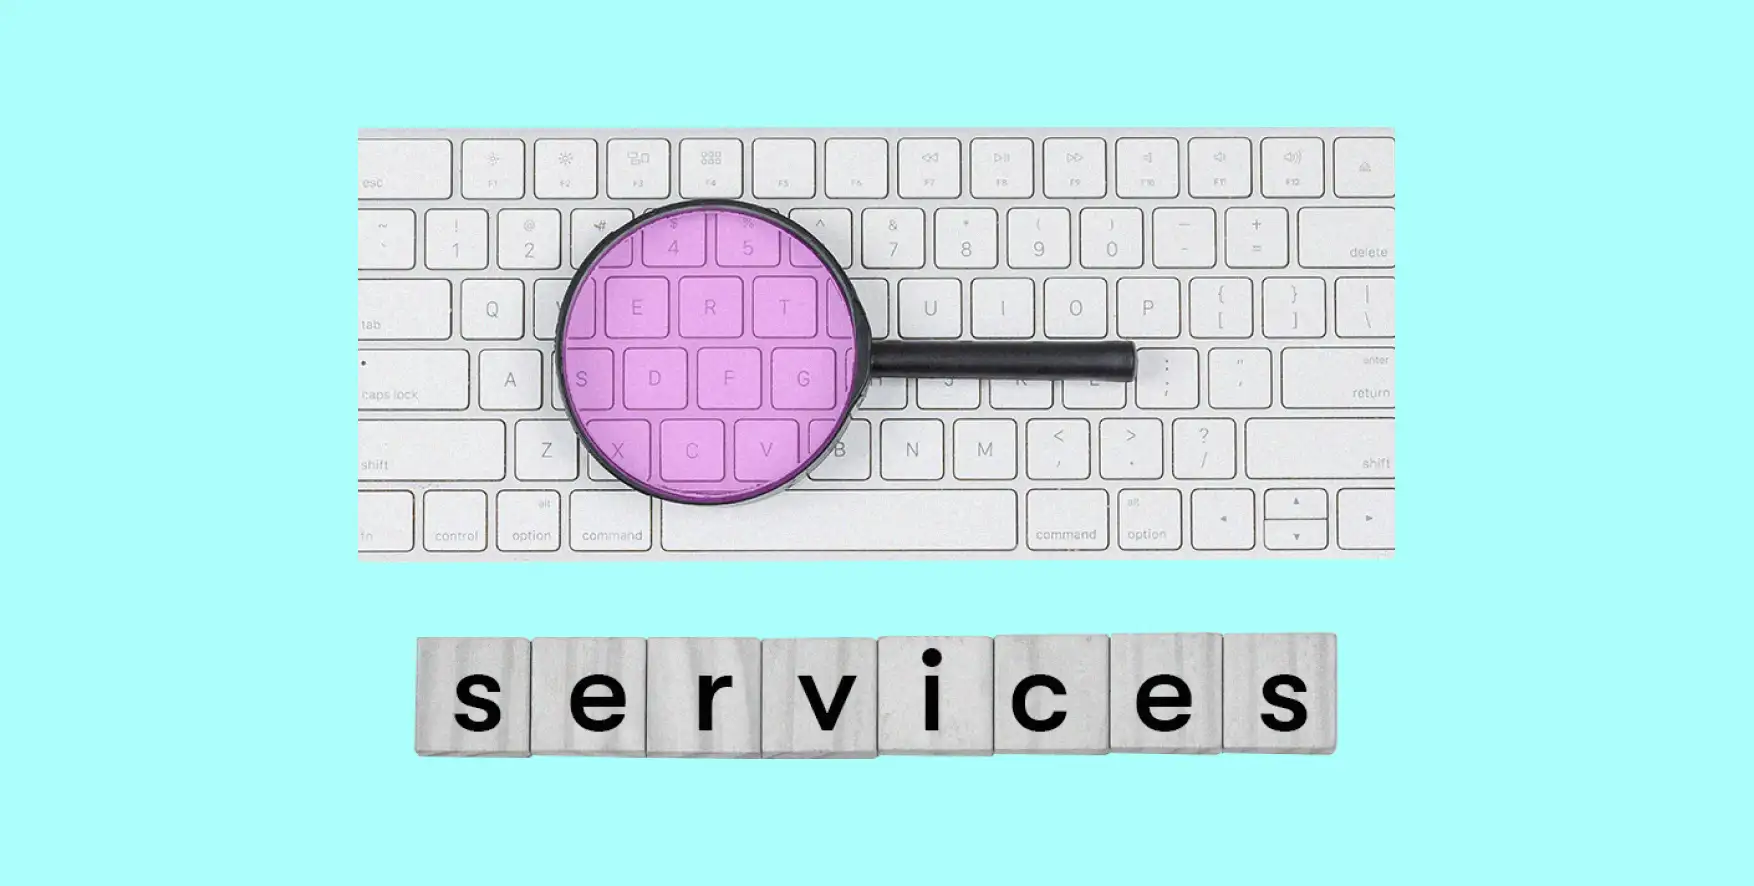 a magnifying glass lies on the keyboard, under which the word Services is written